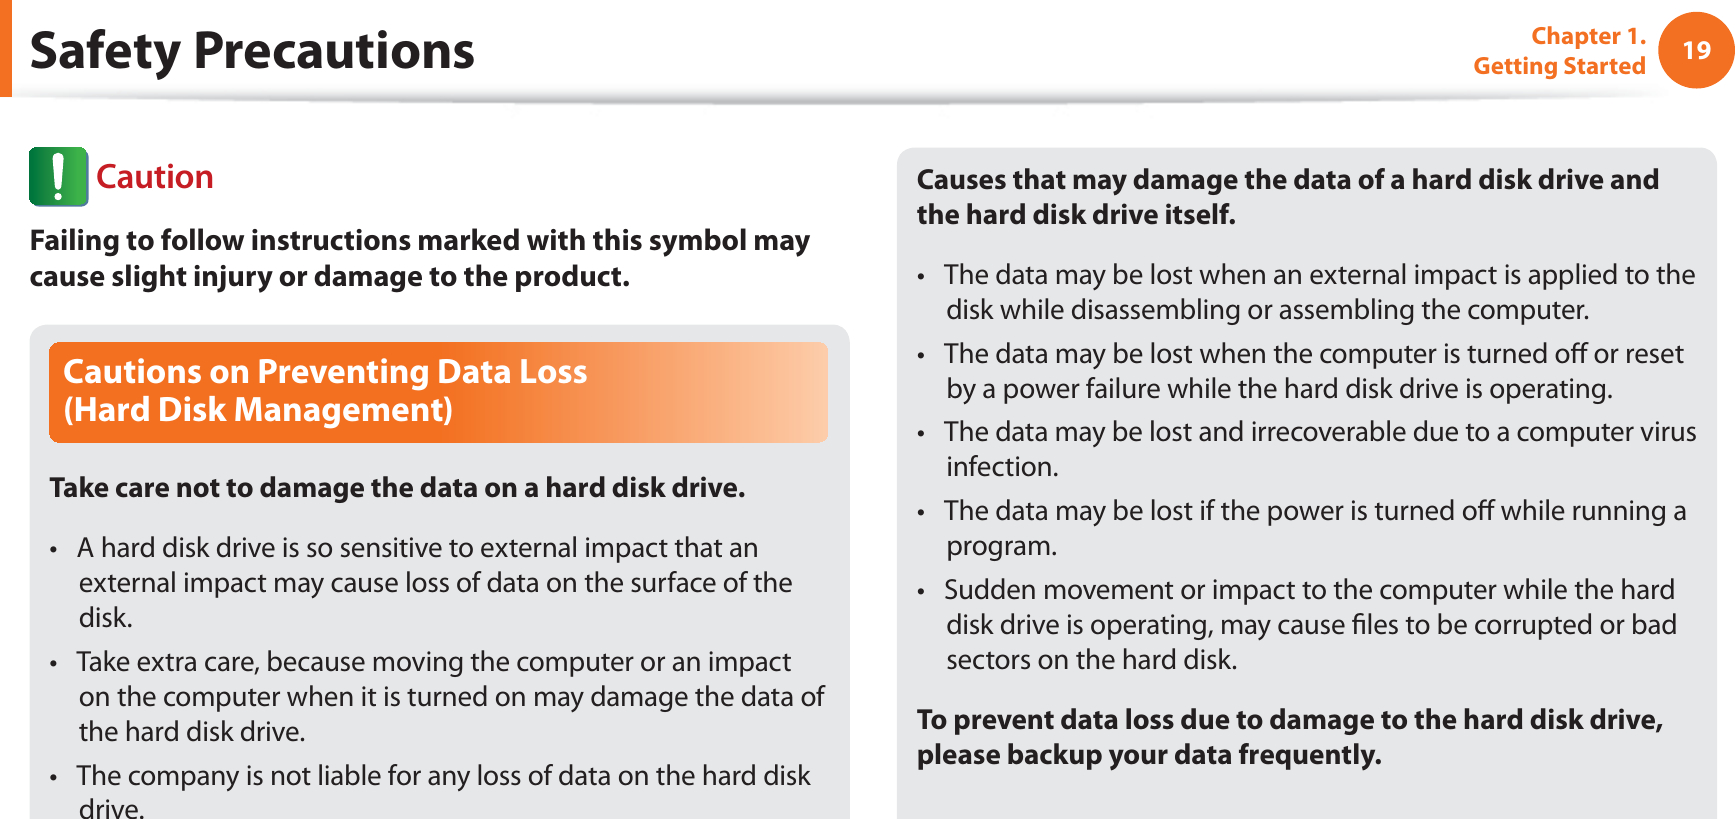 19Chapter 1. Getting StartedCautions on Preventing Data Loss  (Hard Disk Management)Take care not to damage the data on a hard disk drive.A hard disk drive is so sensitive to external impact that an t external impact may cause loss of data on the surface of the disk.Take extra care, because moving the computer or an impact t on the computer when it is turned on may damage the data of the hard disk drive.The company is not liable for any loss of data on the hard disk t drive.Causes that may damage the data of a hard disk drive and the hard disk drive itself.The data may be lost when an external impact is applied to the t disk while disassembling or assembling the computer.The data may be lost when the computer is turned oﬀ or reset t by a power failure while the hard disk drive is operating.The data may be lost and irrecoverable due to a computer virus t infection.The data may be lost if the power is turned oﬀ while running a t program.Sudden movement or impact to the computer while the hard t disk drive is operating, may cause ﬁles to be corrupted or bad sectors on the hard disk.To prevent data loss due to damage to the hard disk drive, please backup your data frequently.Safety Precautions CautionFailing to follow instructions marked with this symbol may cause slight injury or damage to the product.